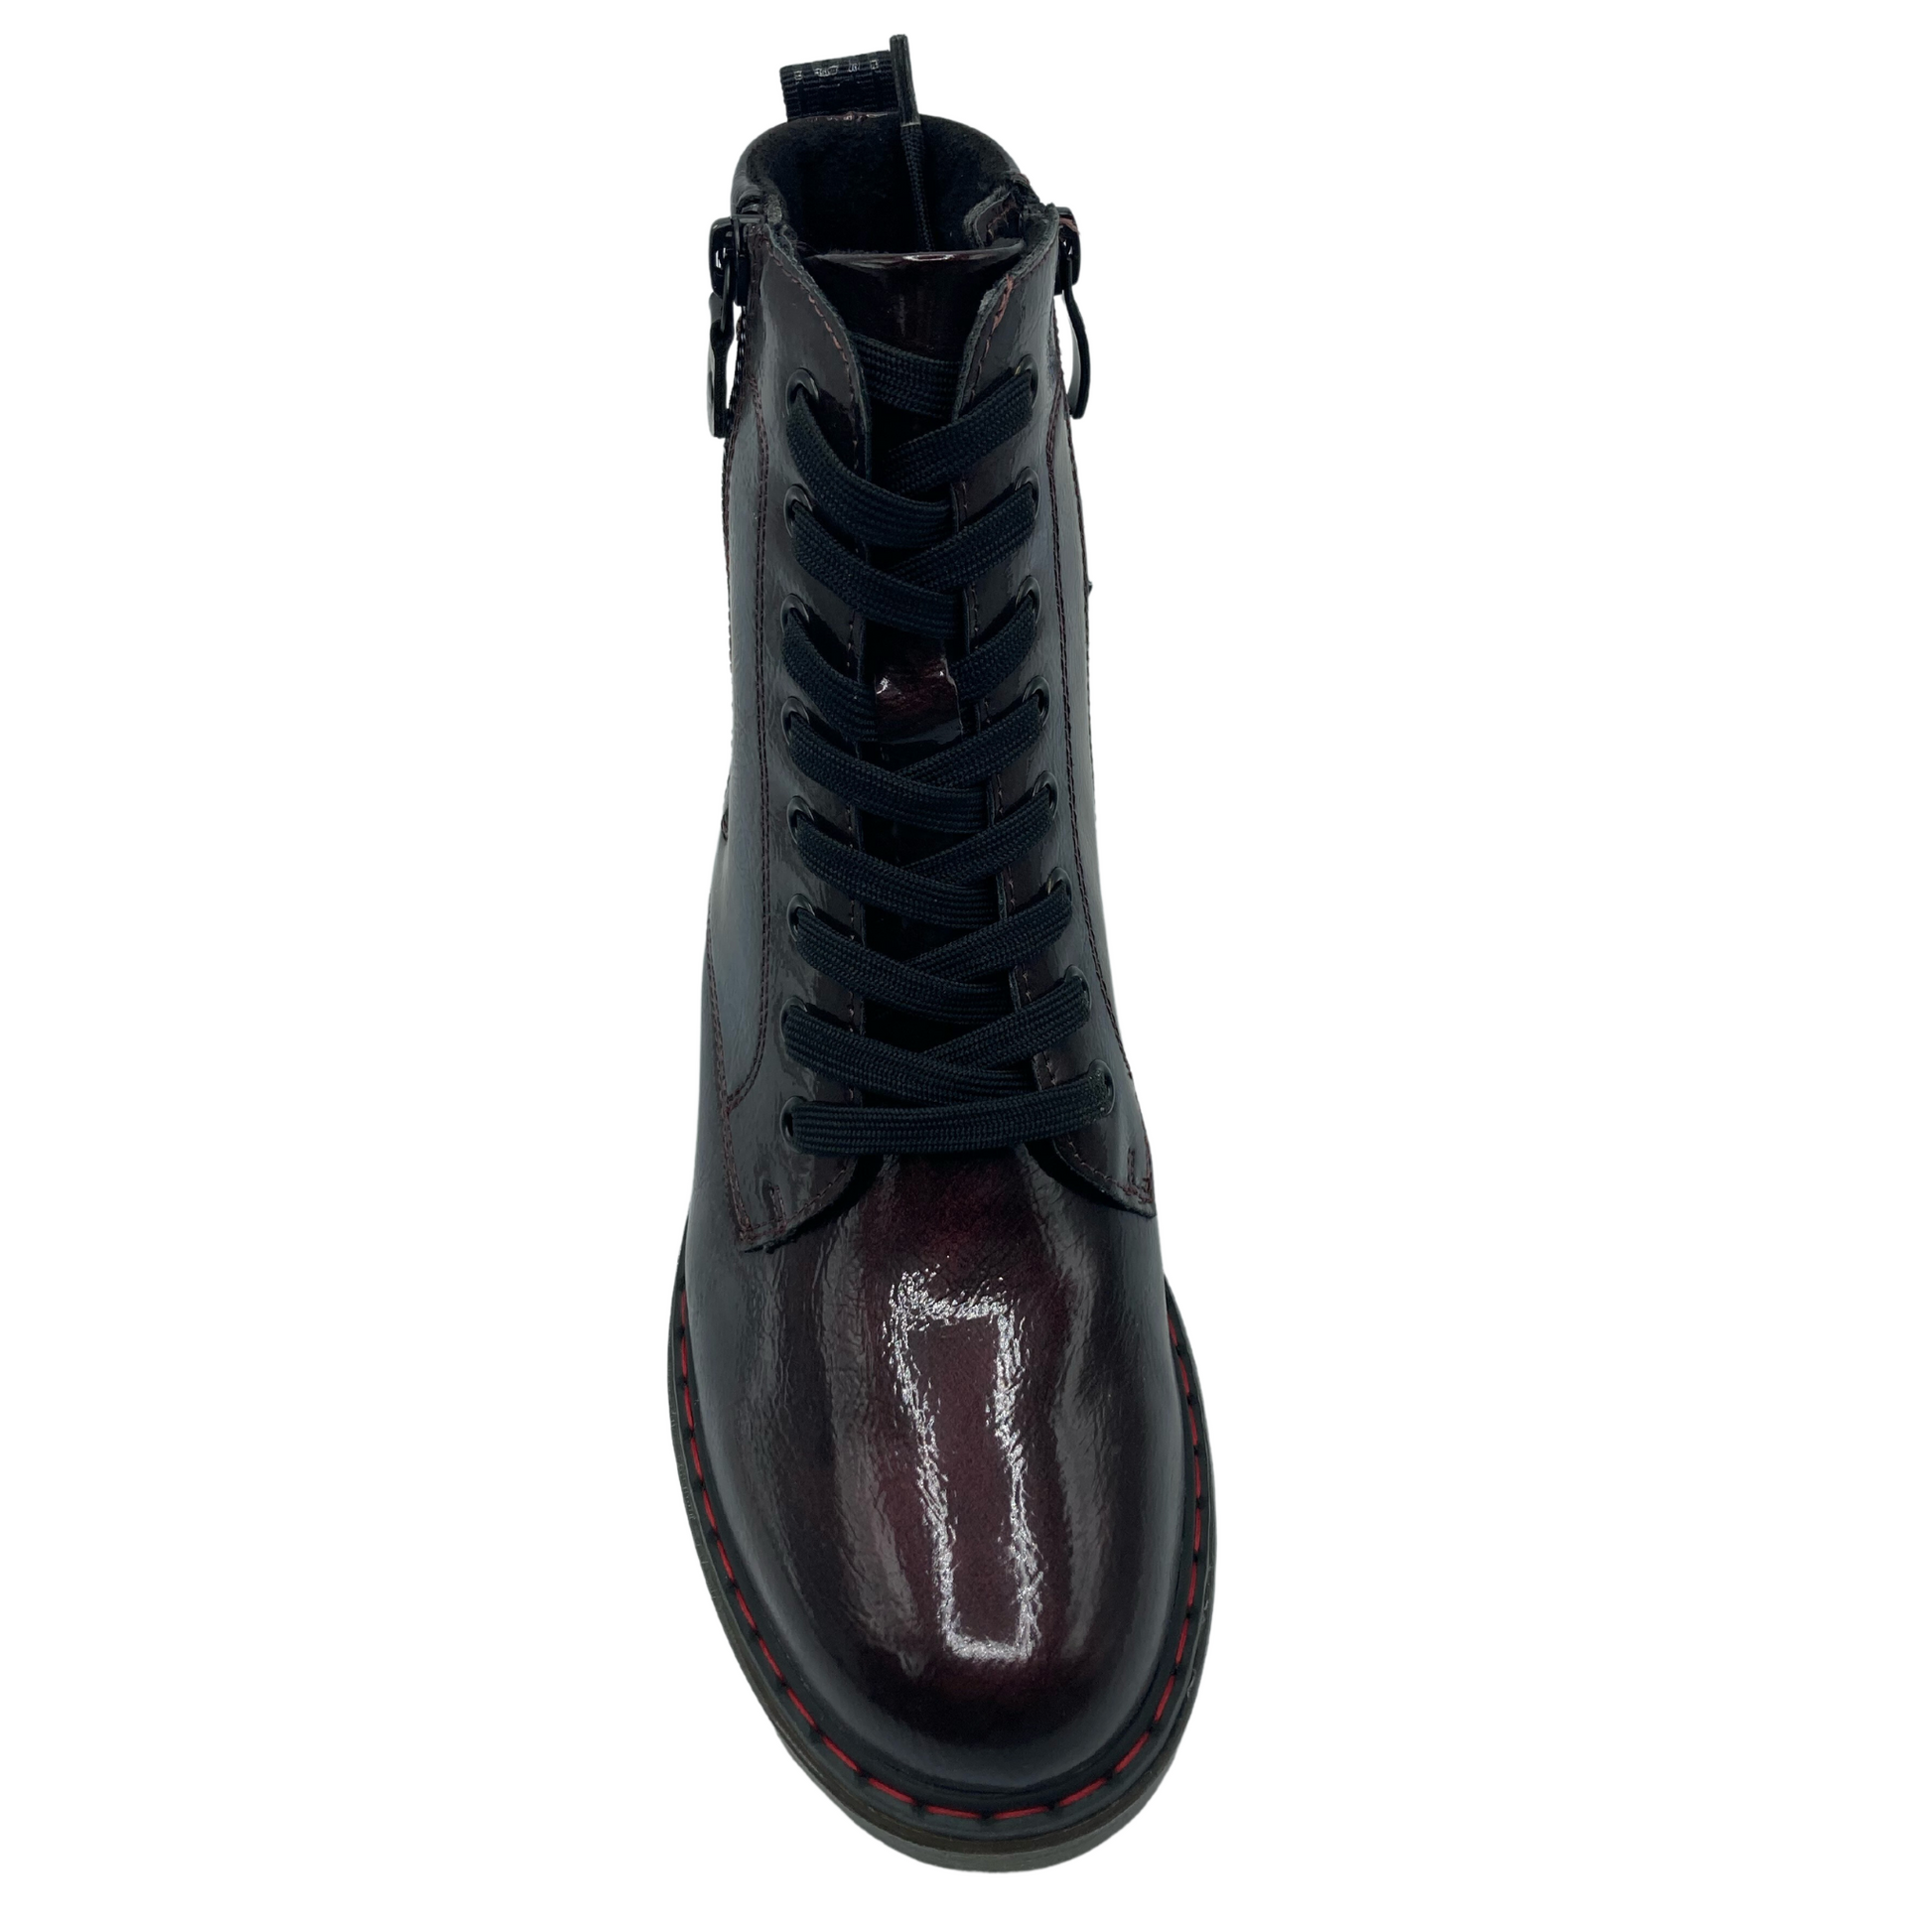 Top view of vegan leather boot with black laces and double side zipper closures